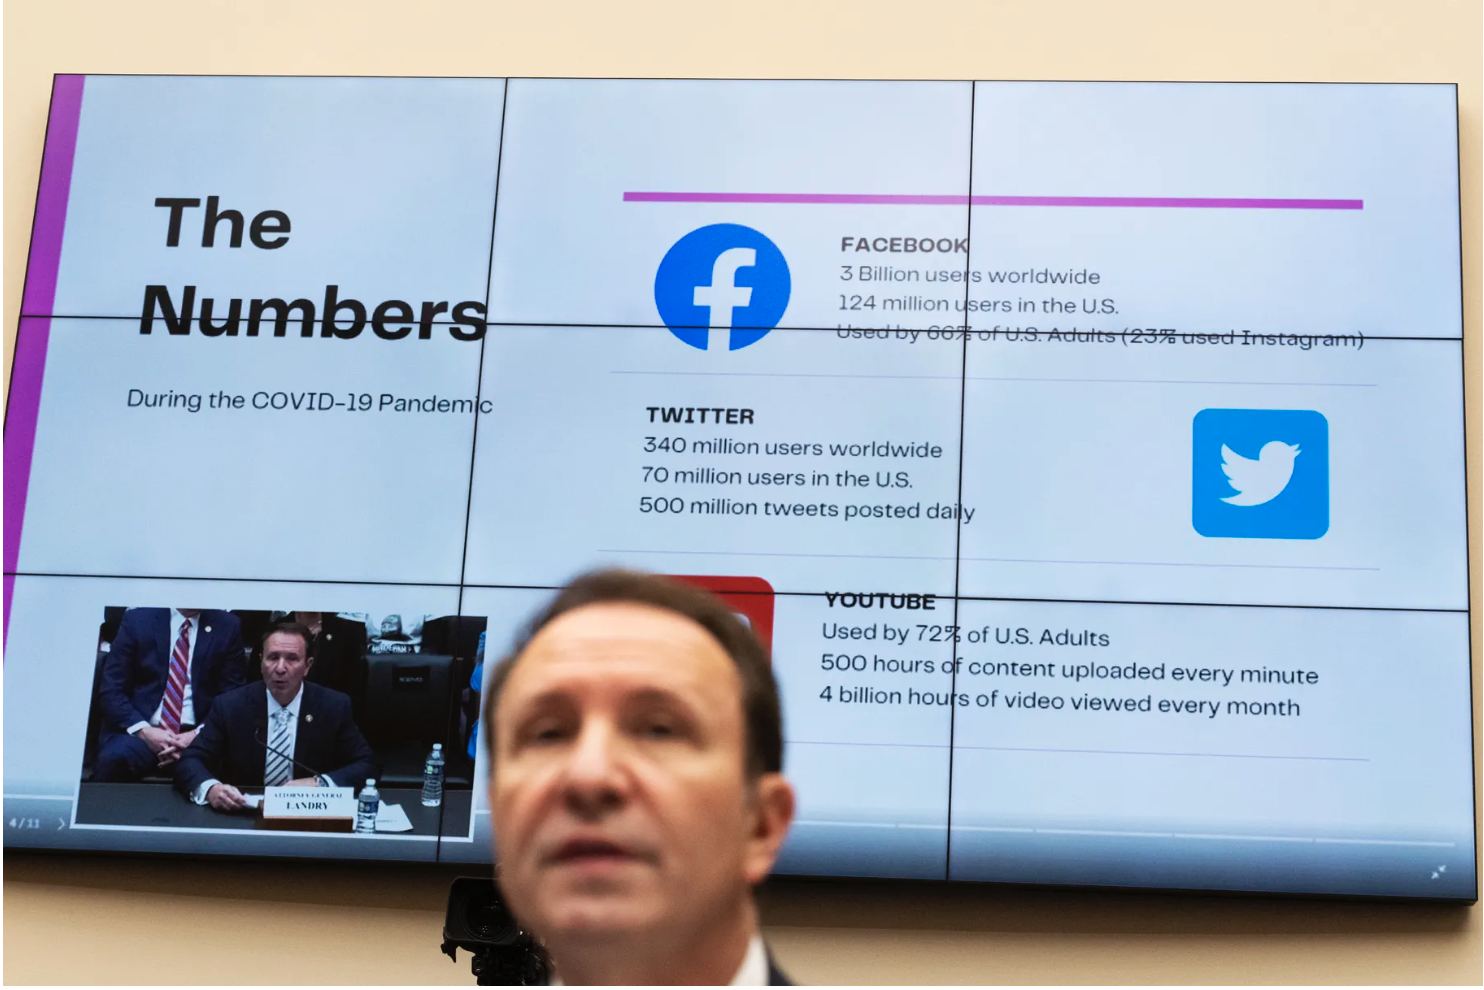 Louisiana Attorney General Jeff Landry testifies in a House hearing in March 2023. Landry is suing the Biden administration over alleged censorship on social media platforms. Tom Williams/CQ-Roll Call, Inc via Getty Images